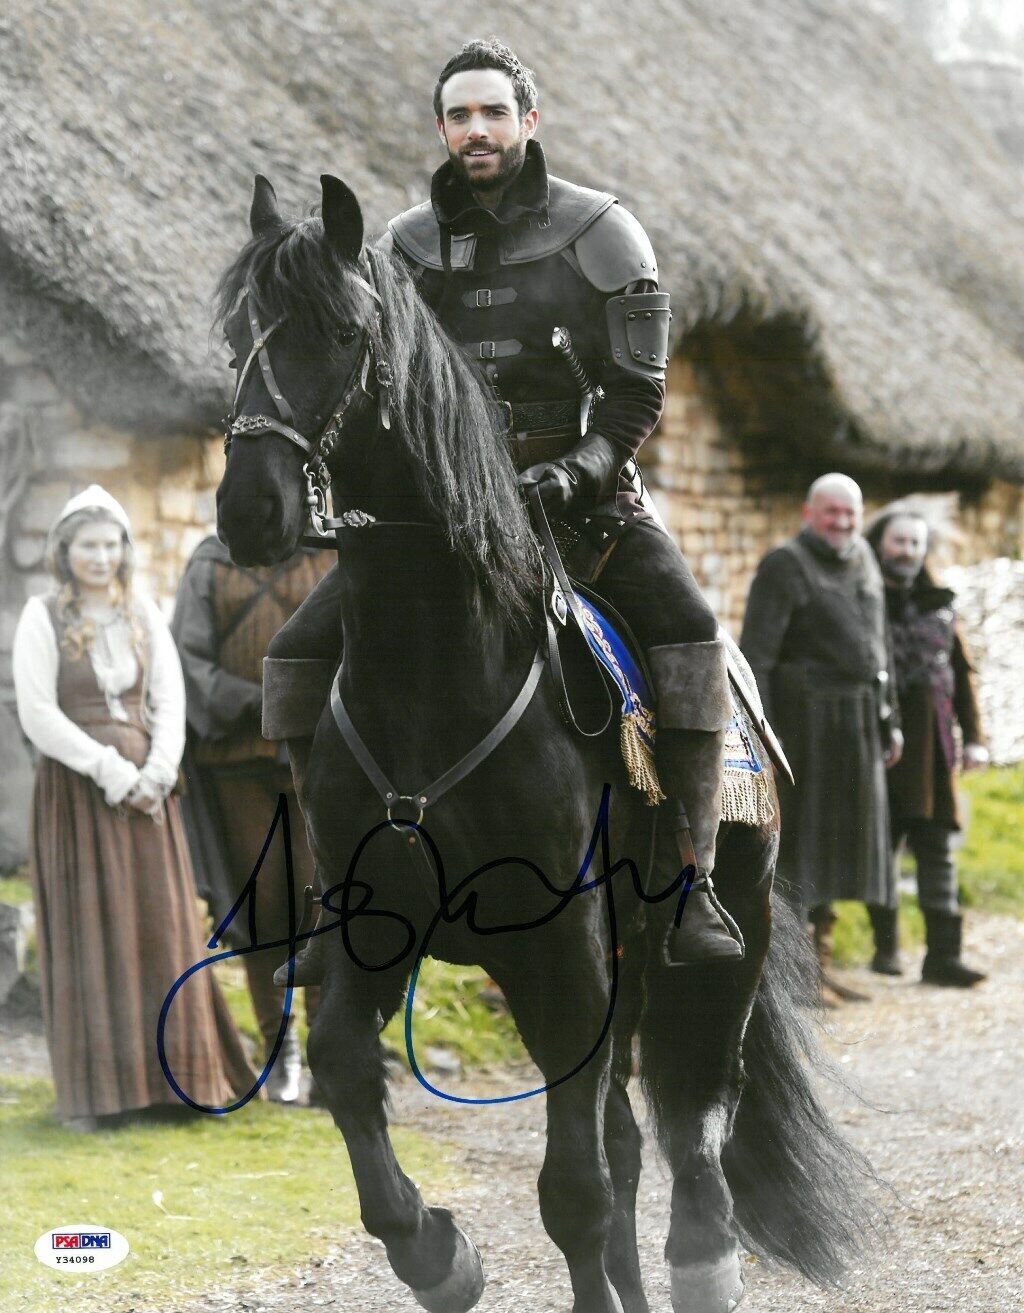 Joshua Sasse Signed Galavant Authentic Autographed 11x14 Photo Poster painting PSA/DNA #Y34098